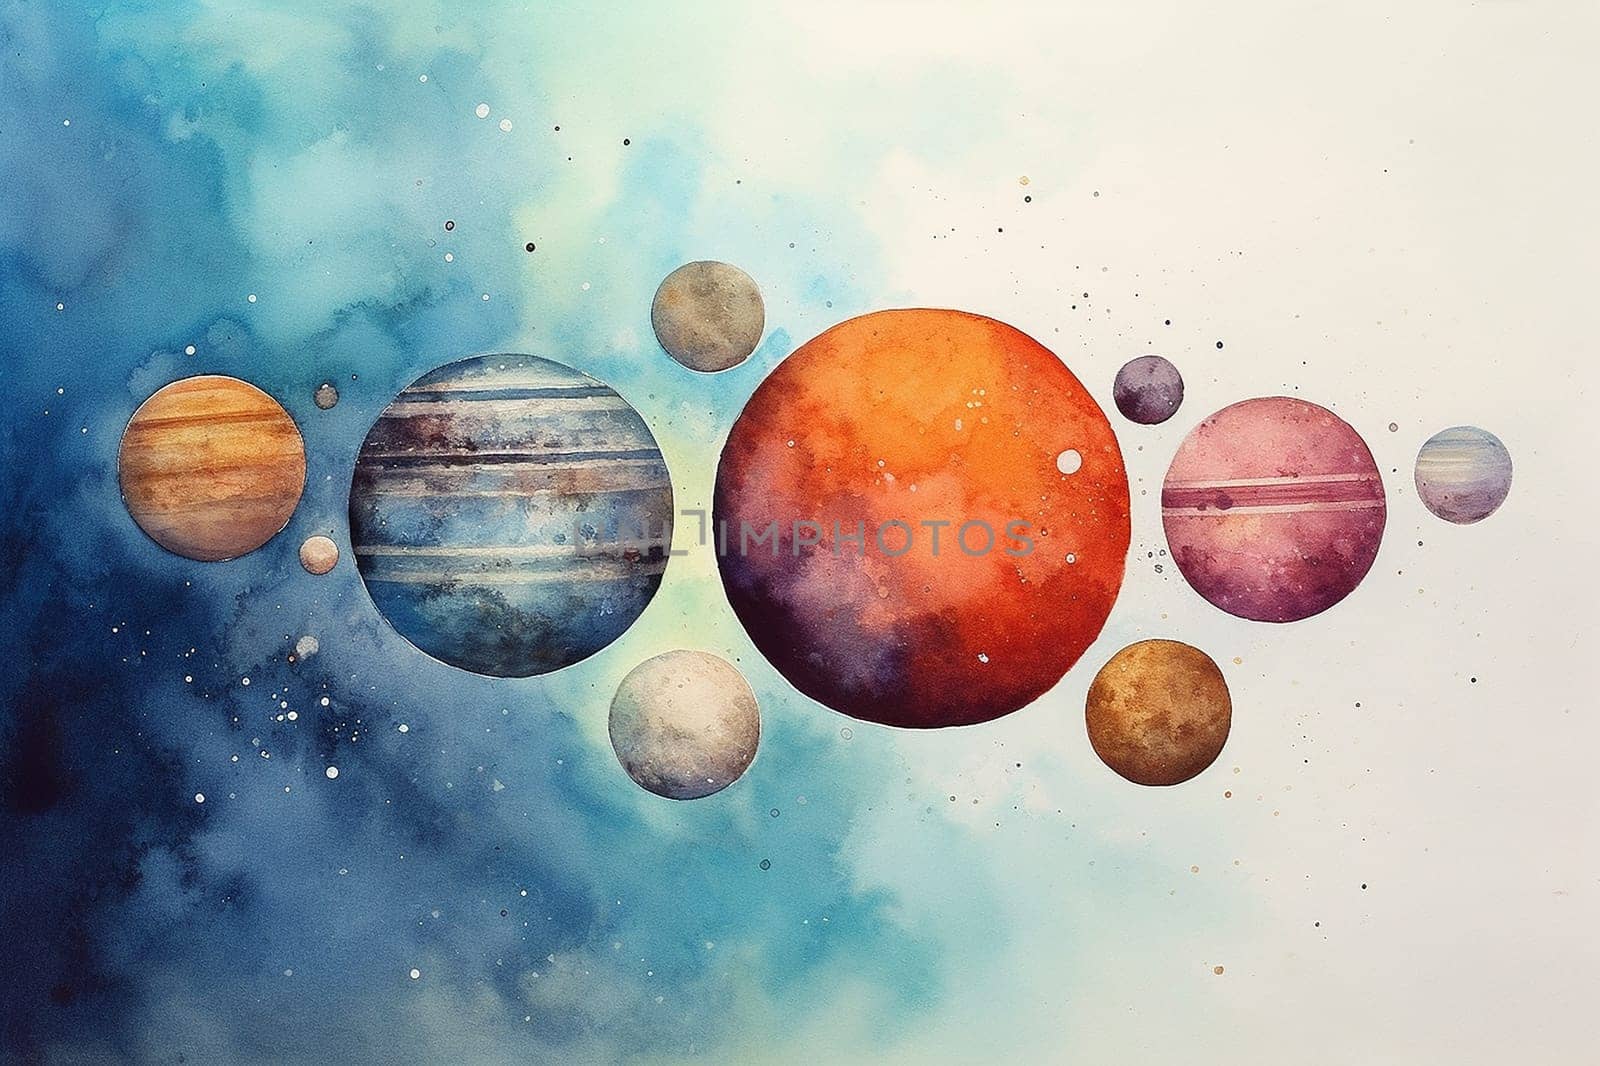 Watercolor painting of various planets and celestial bodies.